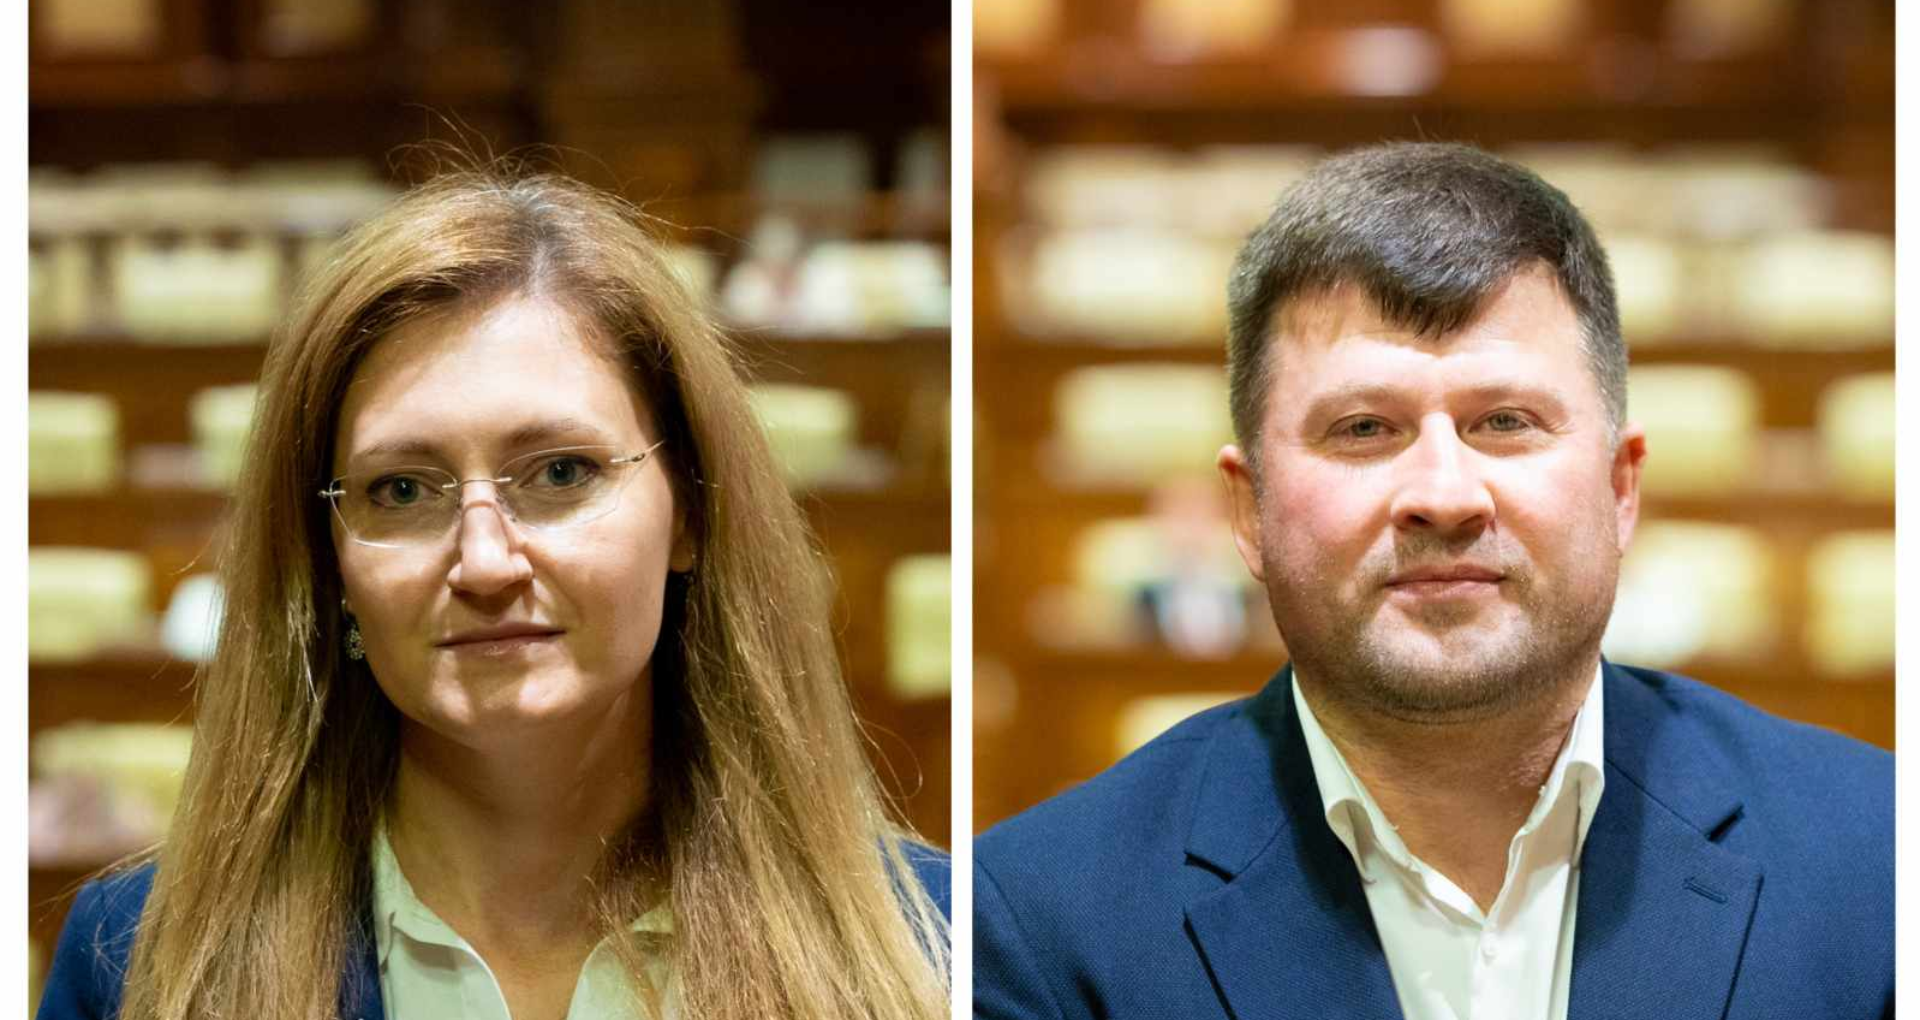 Parliament appointed two non-judge members for the Superior Council of Magistracy